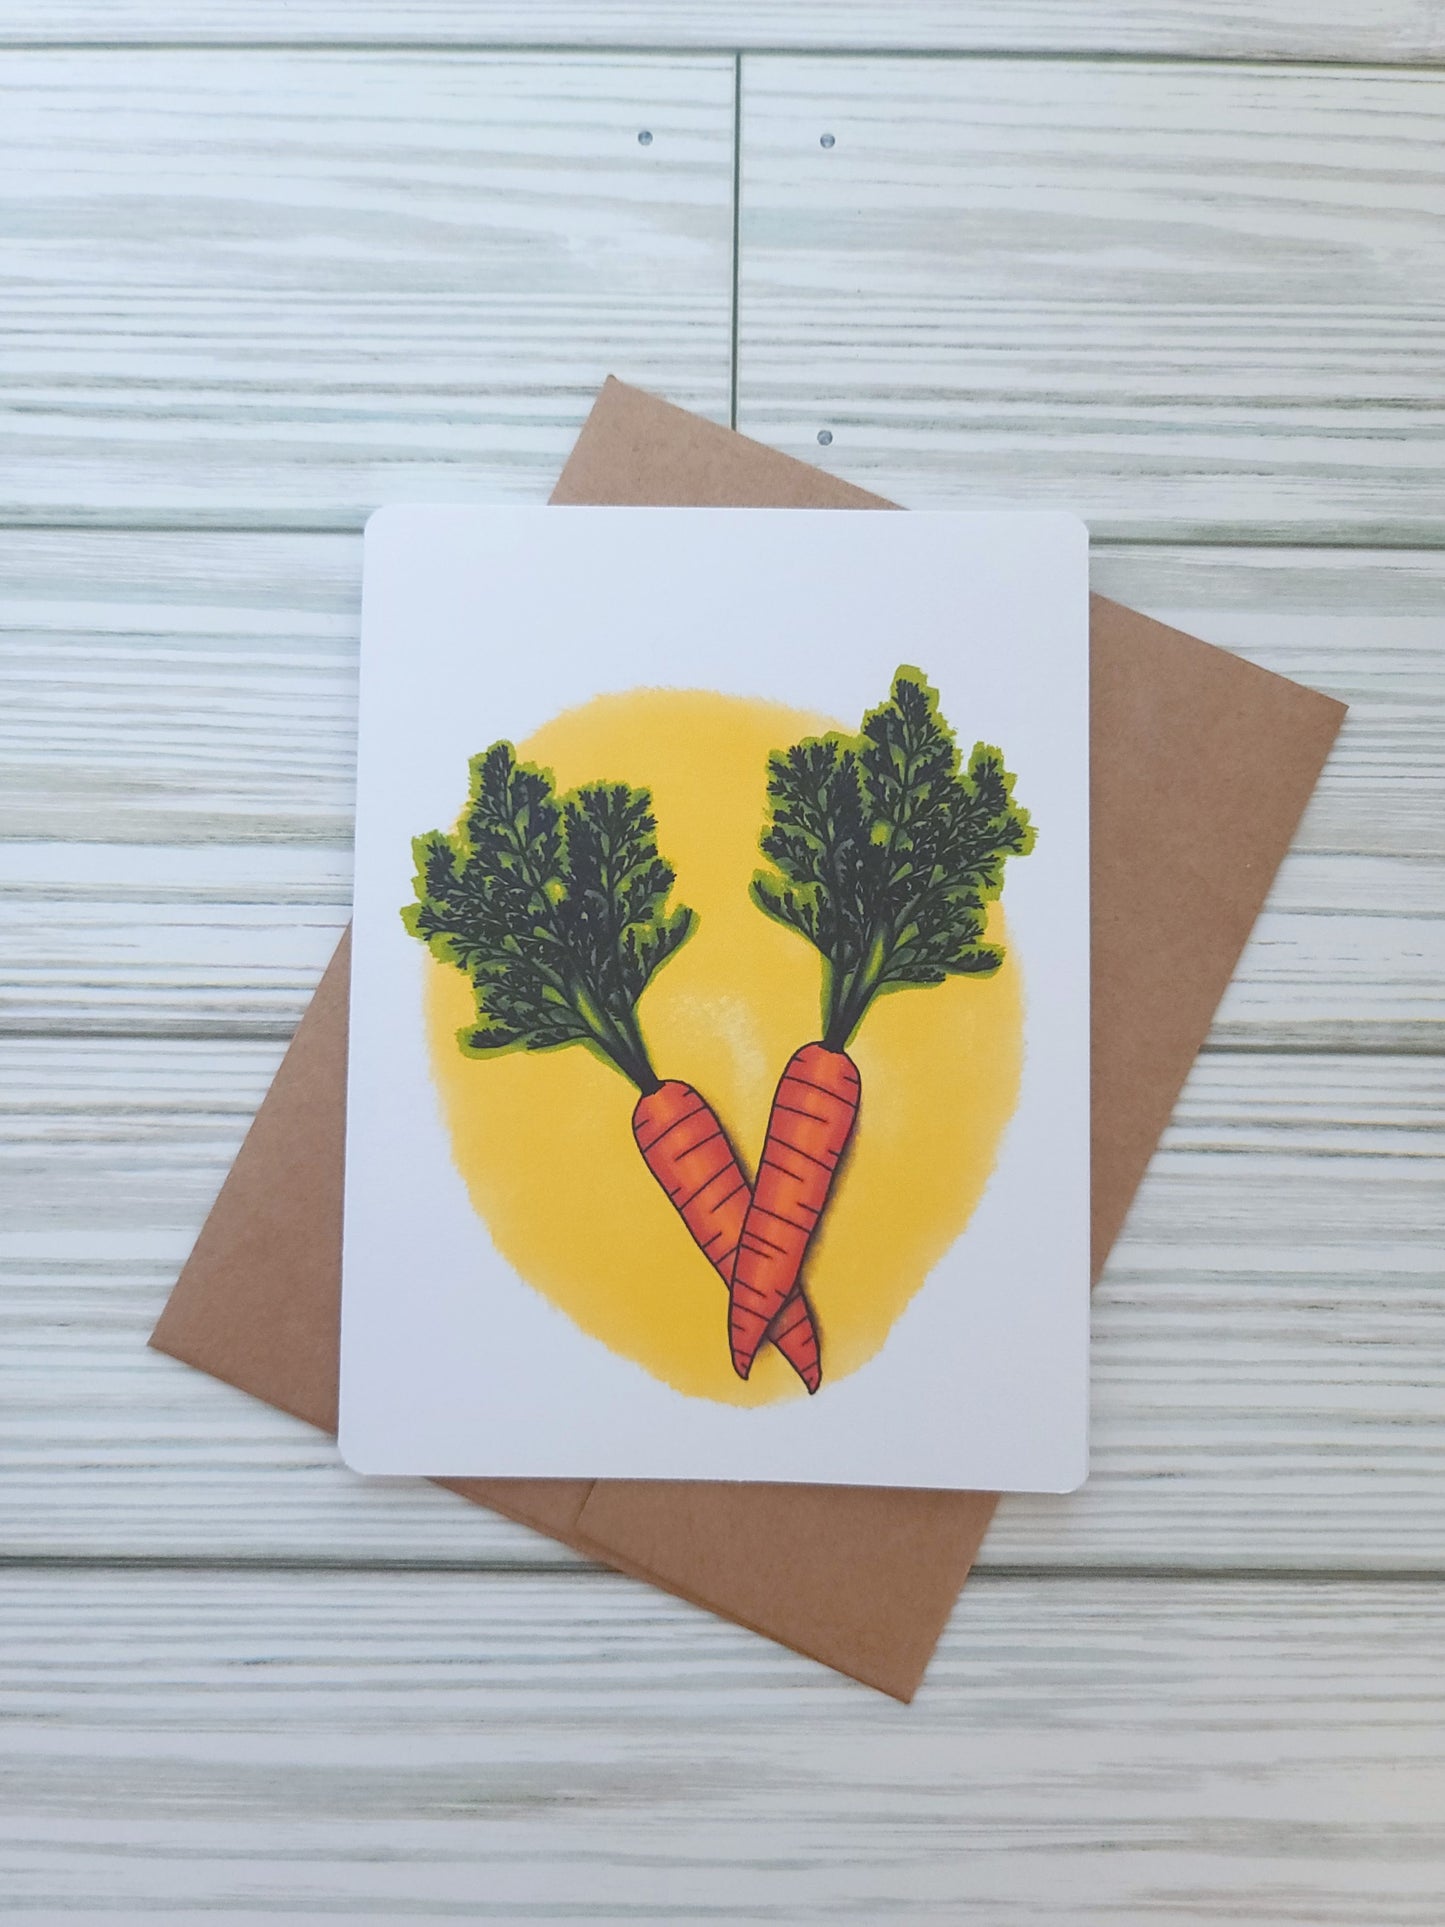 Carrot Handmade Greeting Card - Recycled Paper and Kraft Envelope - Portrait Overhead Shot